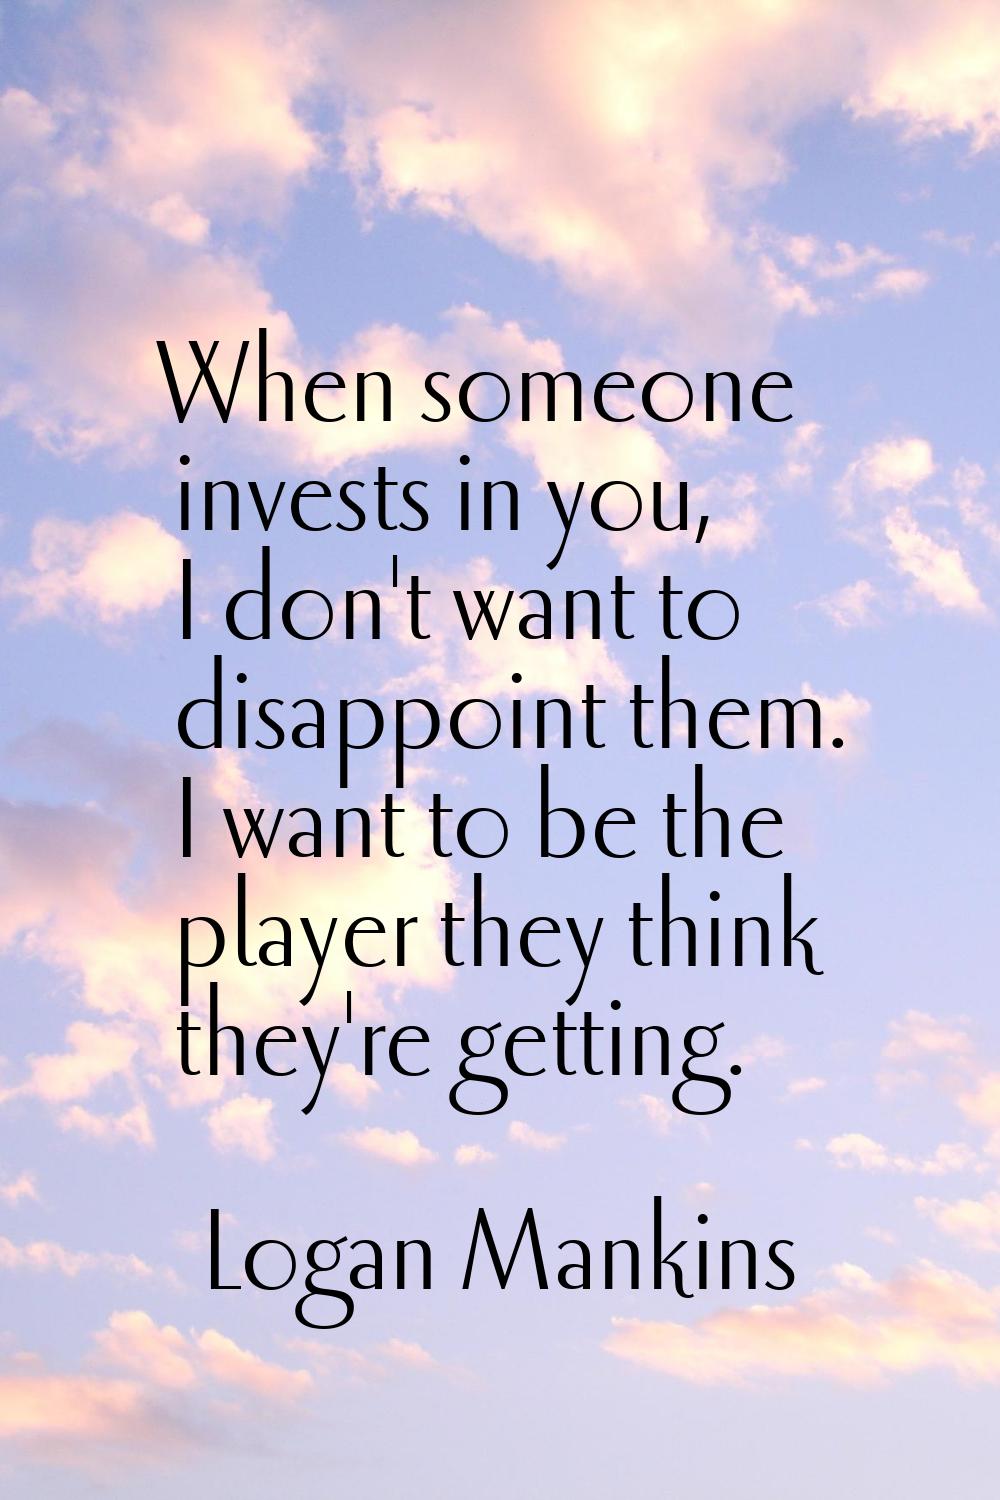 When someone invests in you, I don't want to disappoint them. I want to be the player they think th